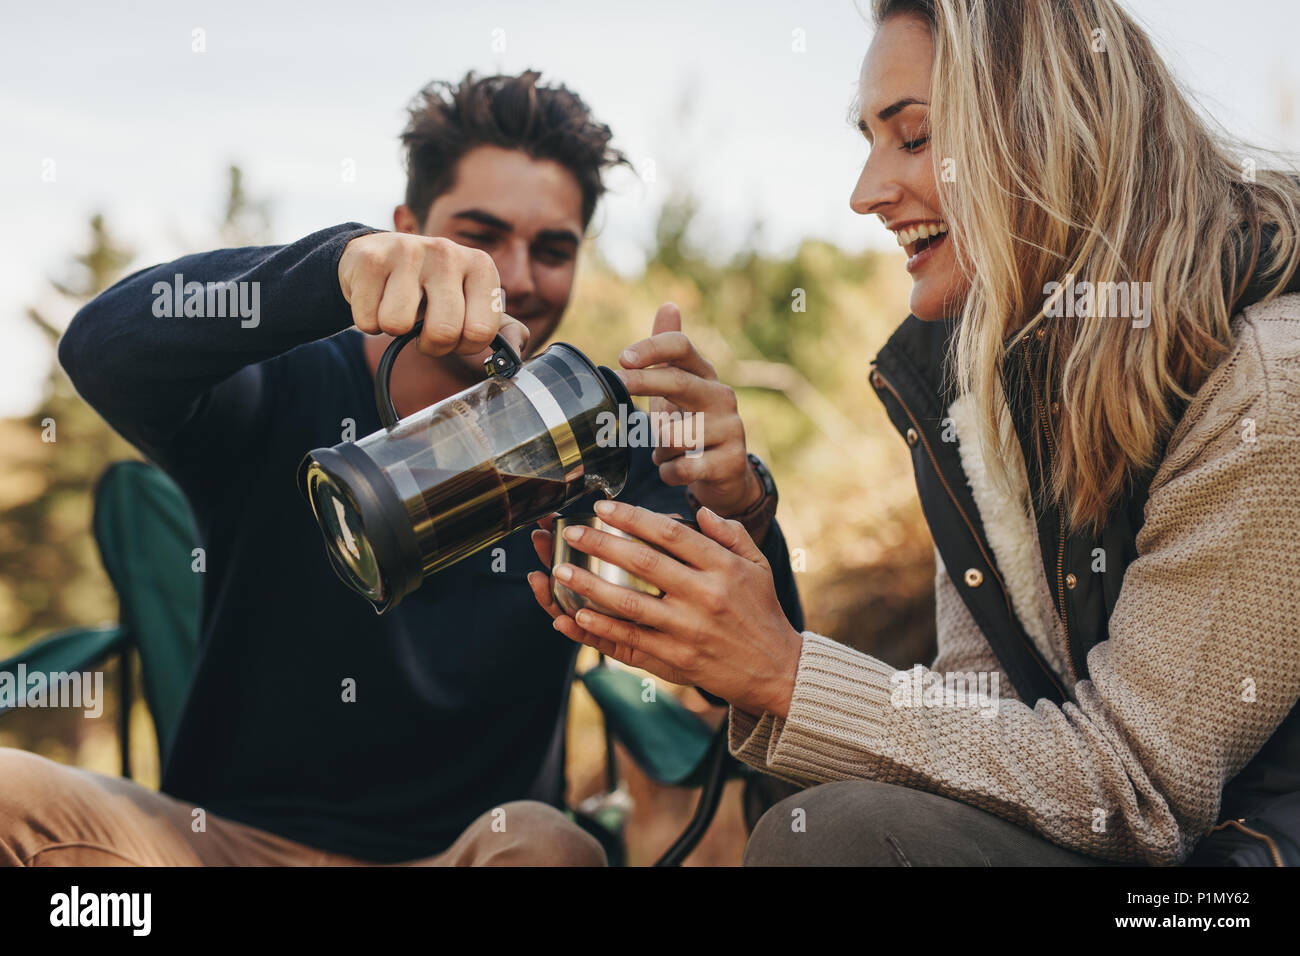 Young couple having coffee at a campsite. Man serving coffee to woman. Stock Photo